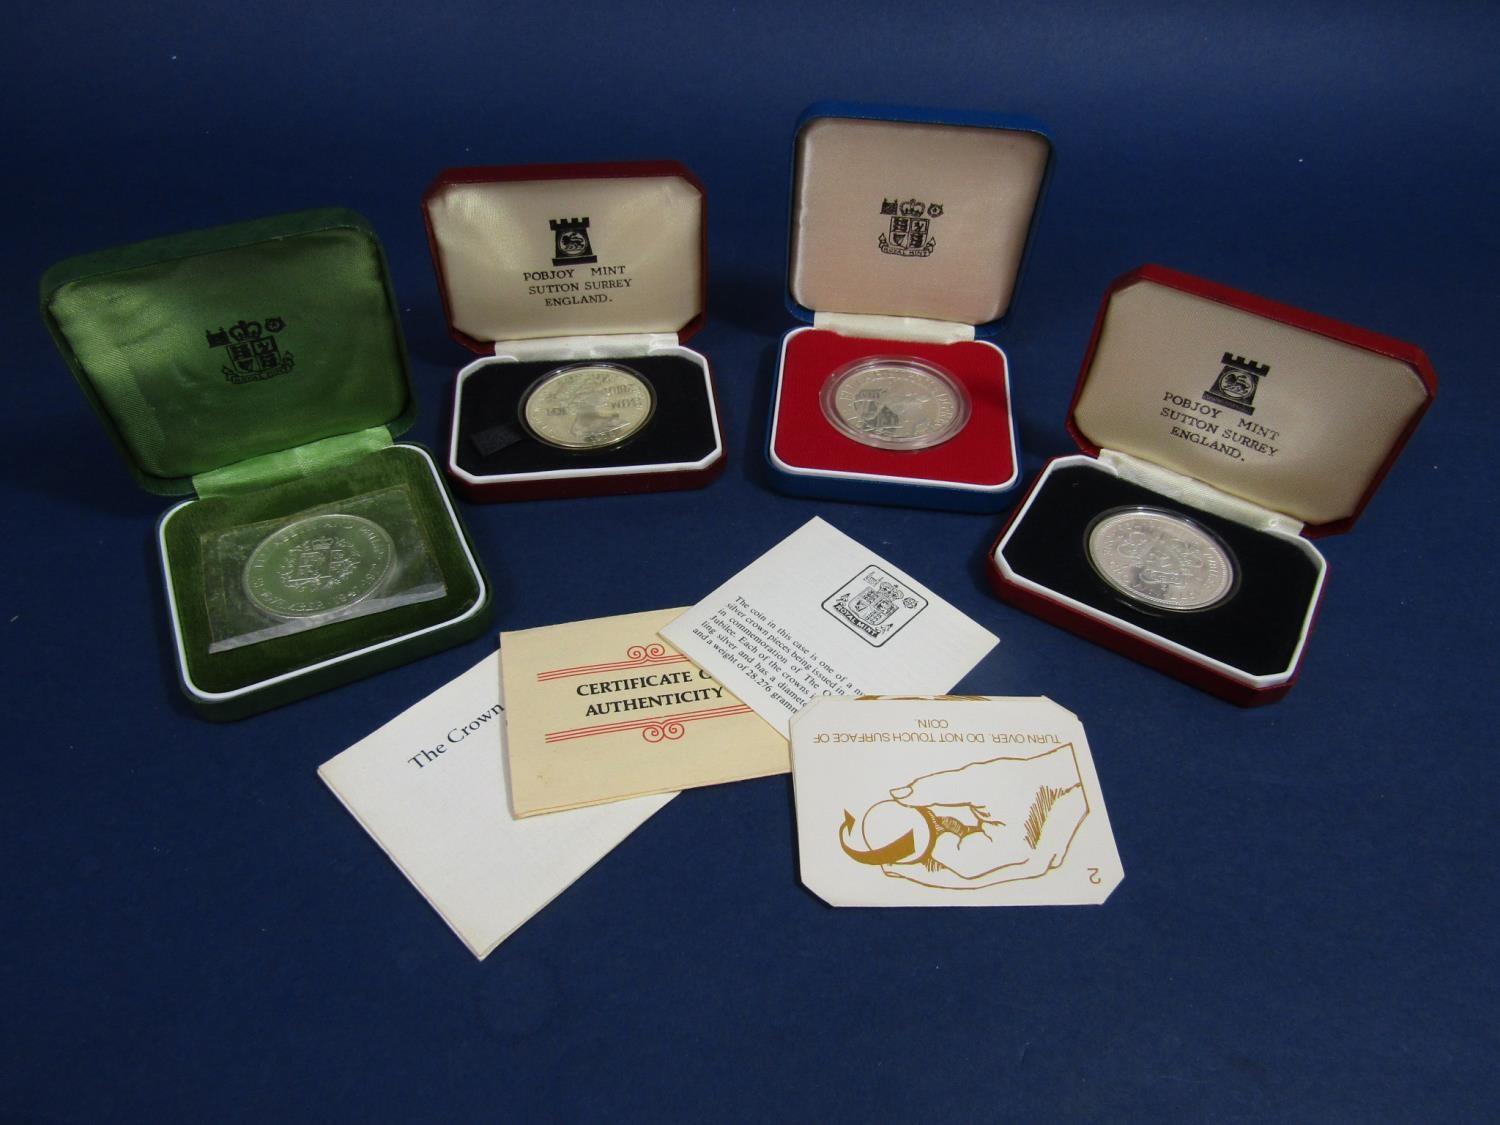 Collection of four Royal Mint silver crowns - 1972, 76, 77 and 77, all cased